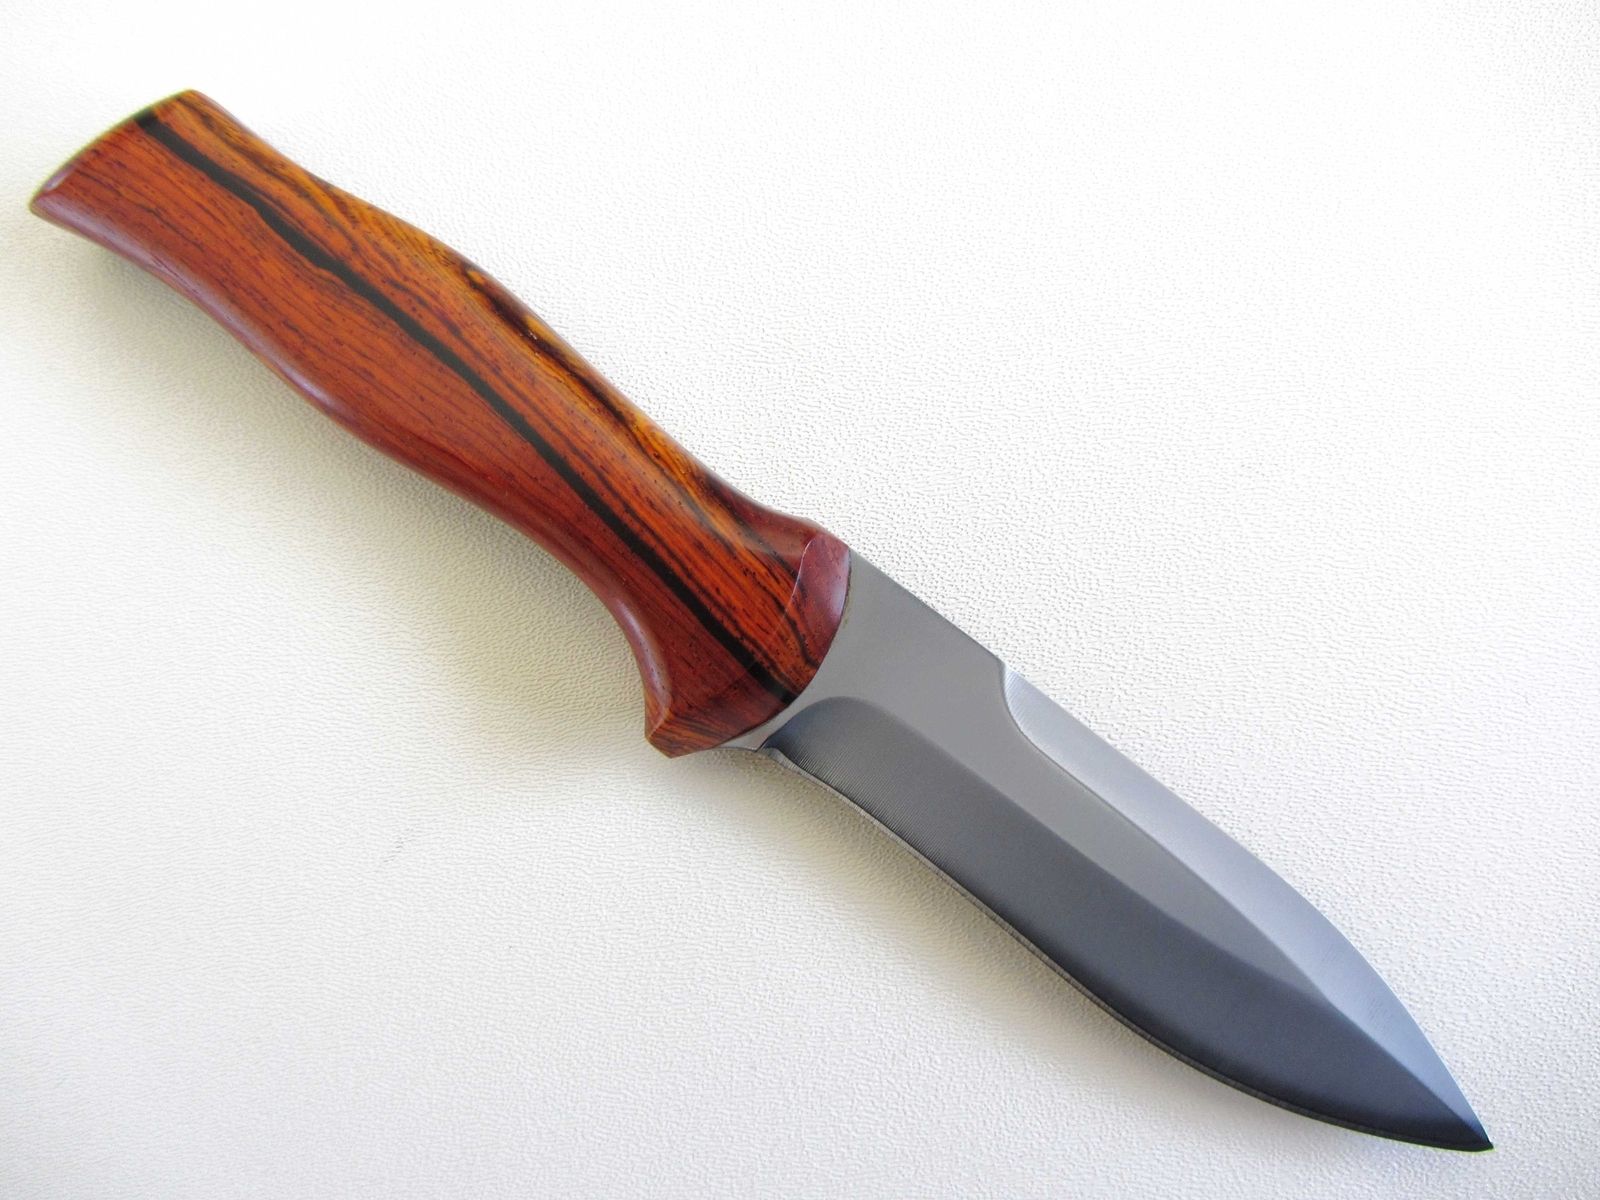 Woodworking knife handle